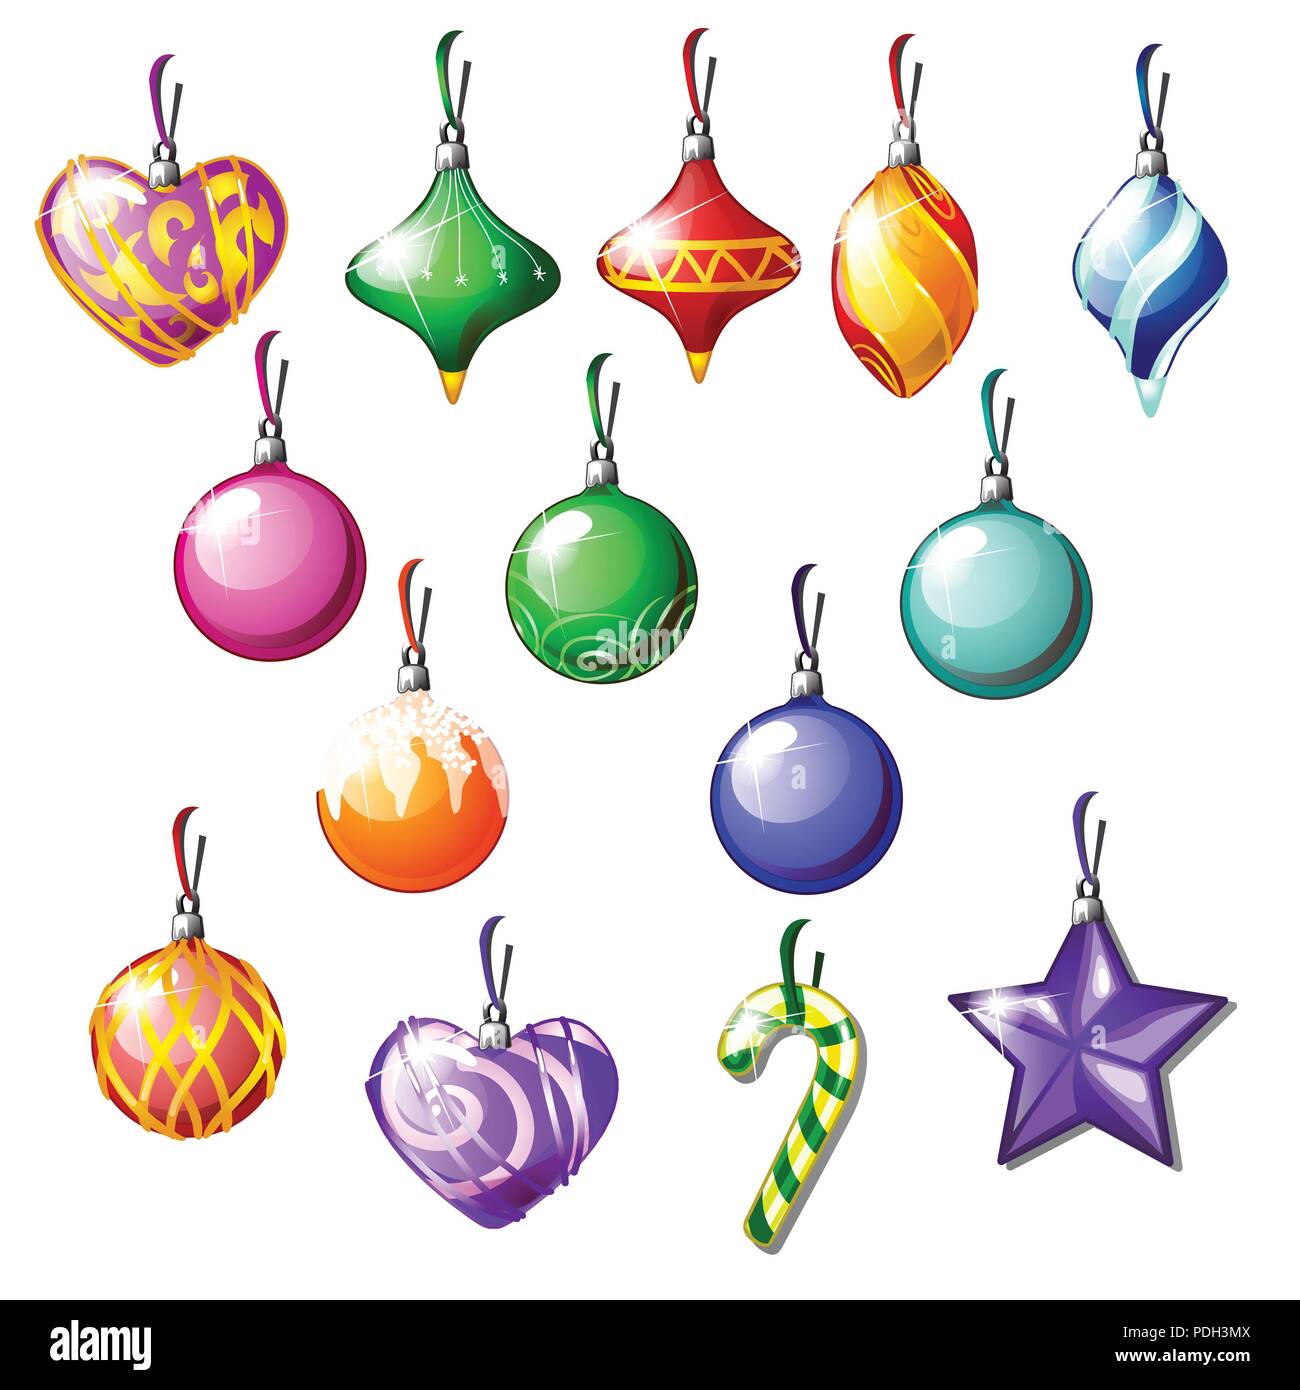 Sketch with Christmas tree decorations isolated on white background. Colorful festive baubles. Template of the poster, invitation and other cards. Vector illustration. Stock Vector